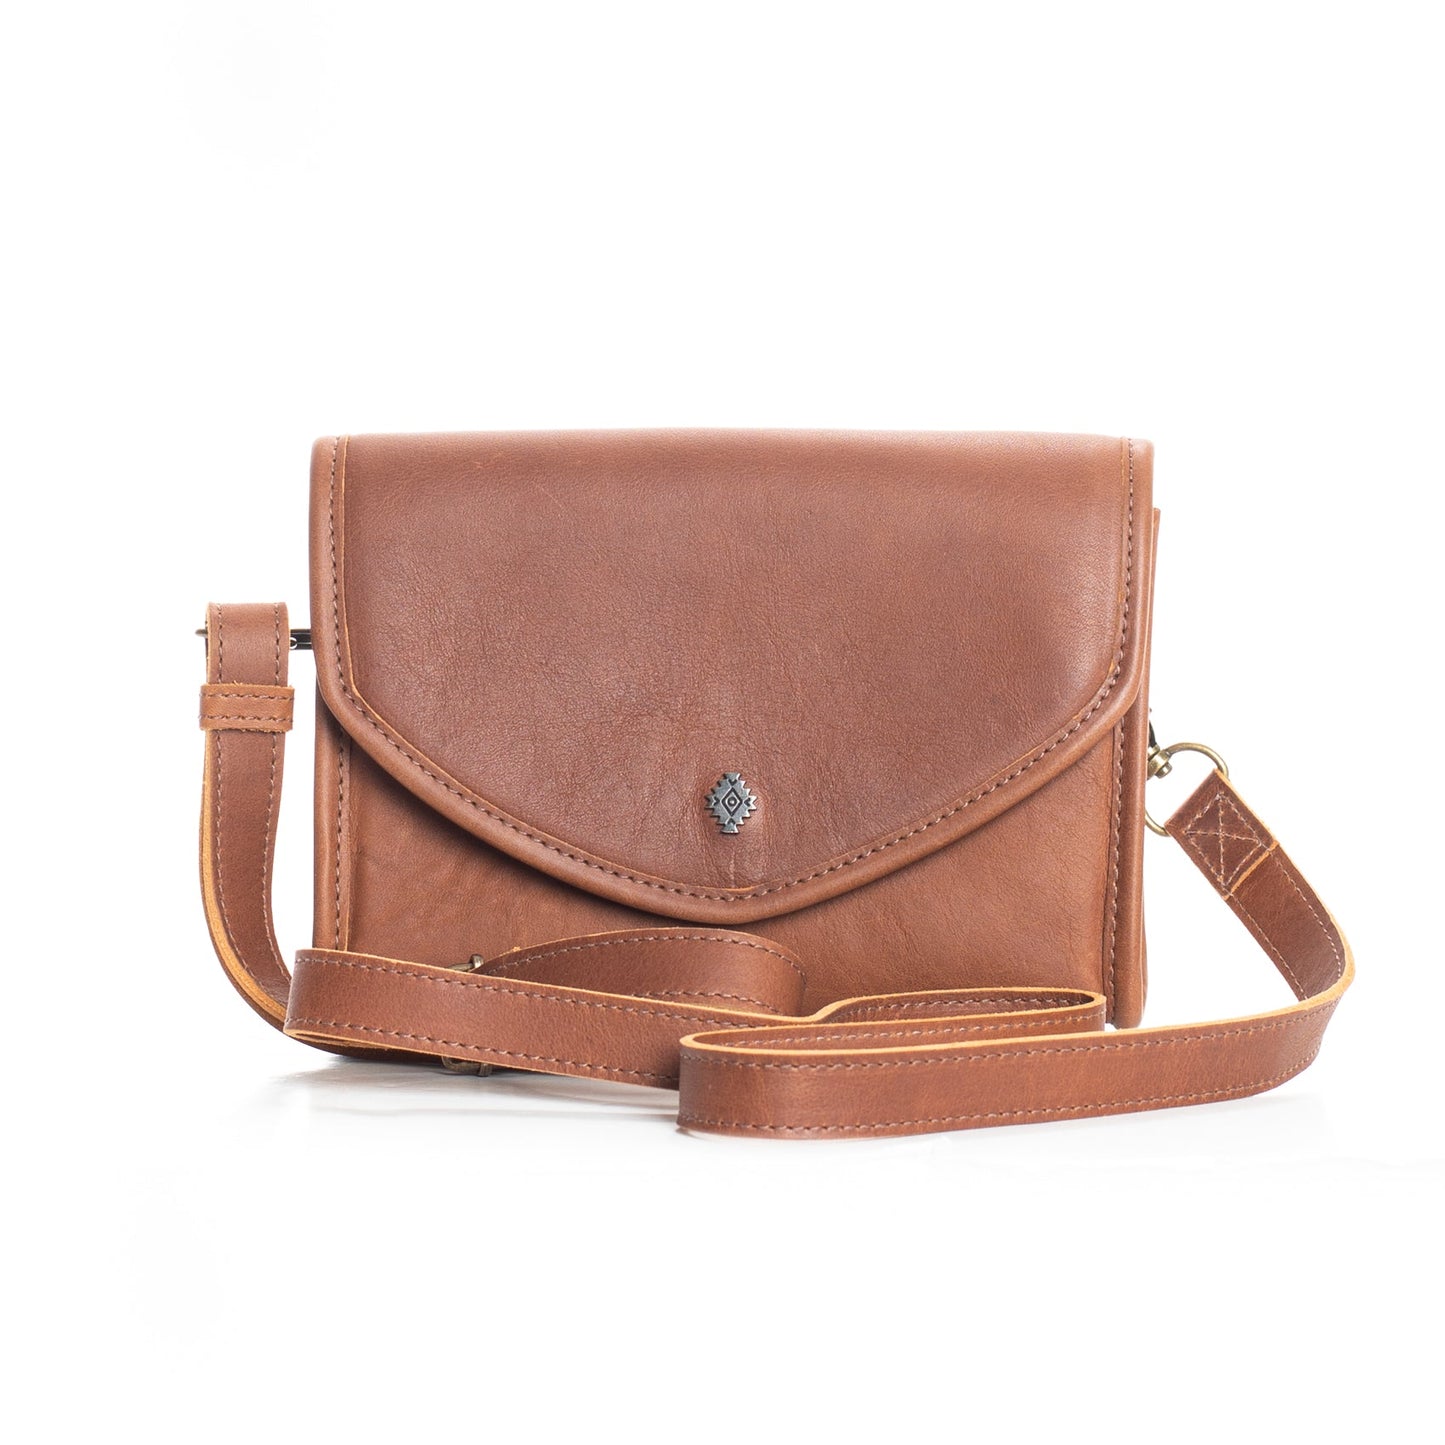 TESORO CROSSBODY WALLET - FULL LEATHER COLLECTION - CAFE